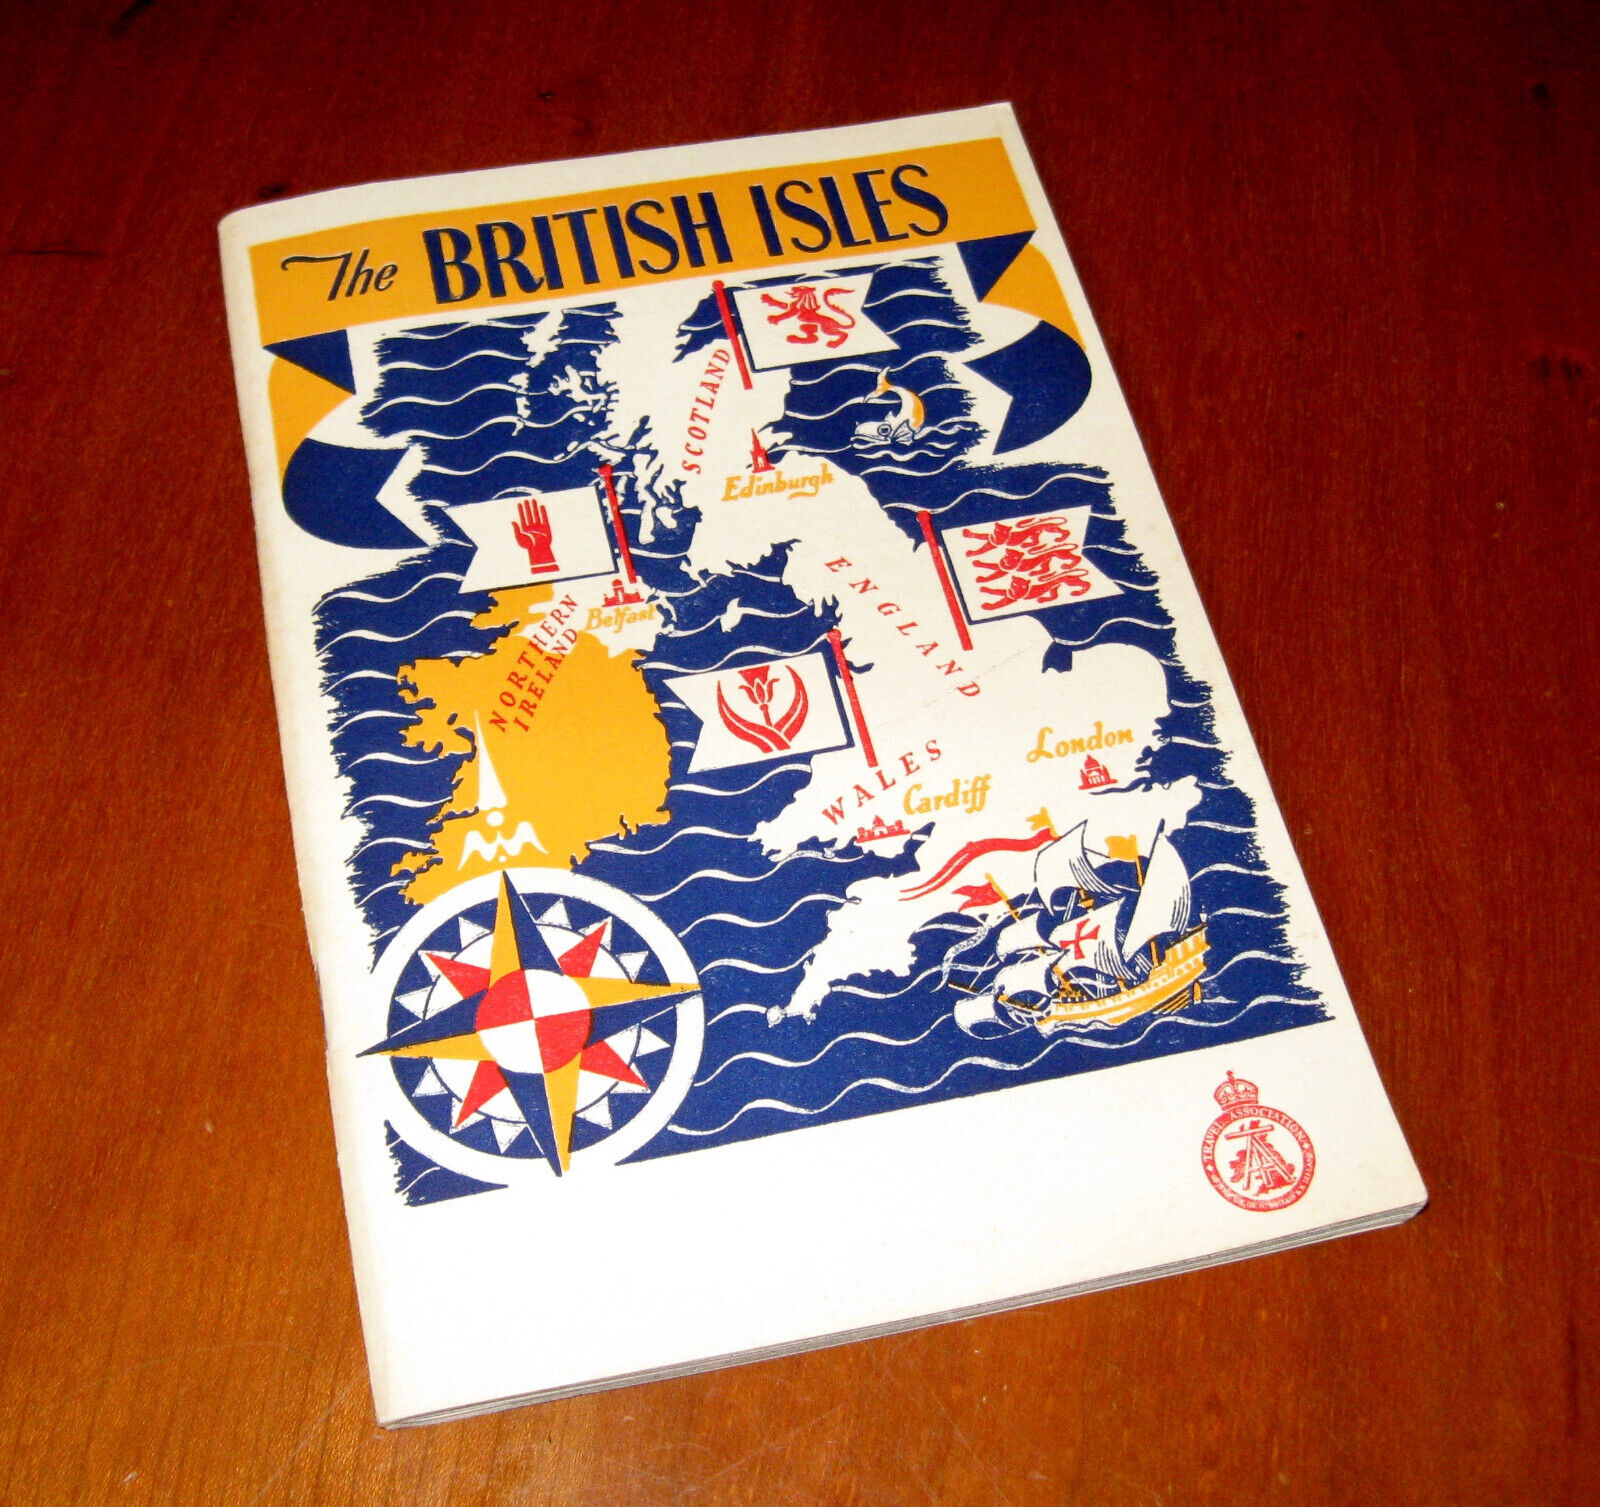 1949 The British Isles Travel Guide Great for UK History The Travel Association